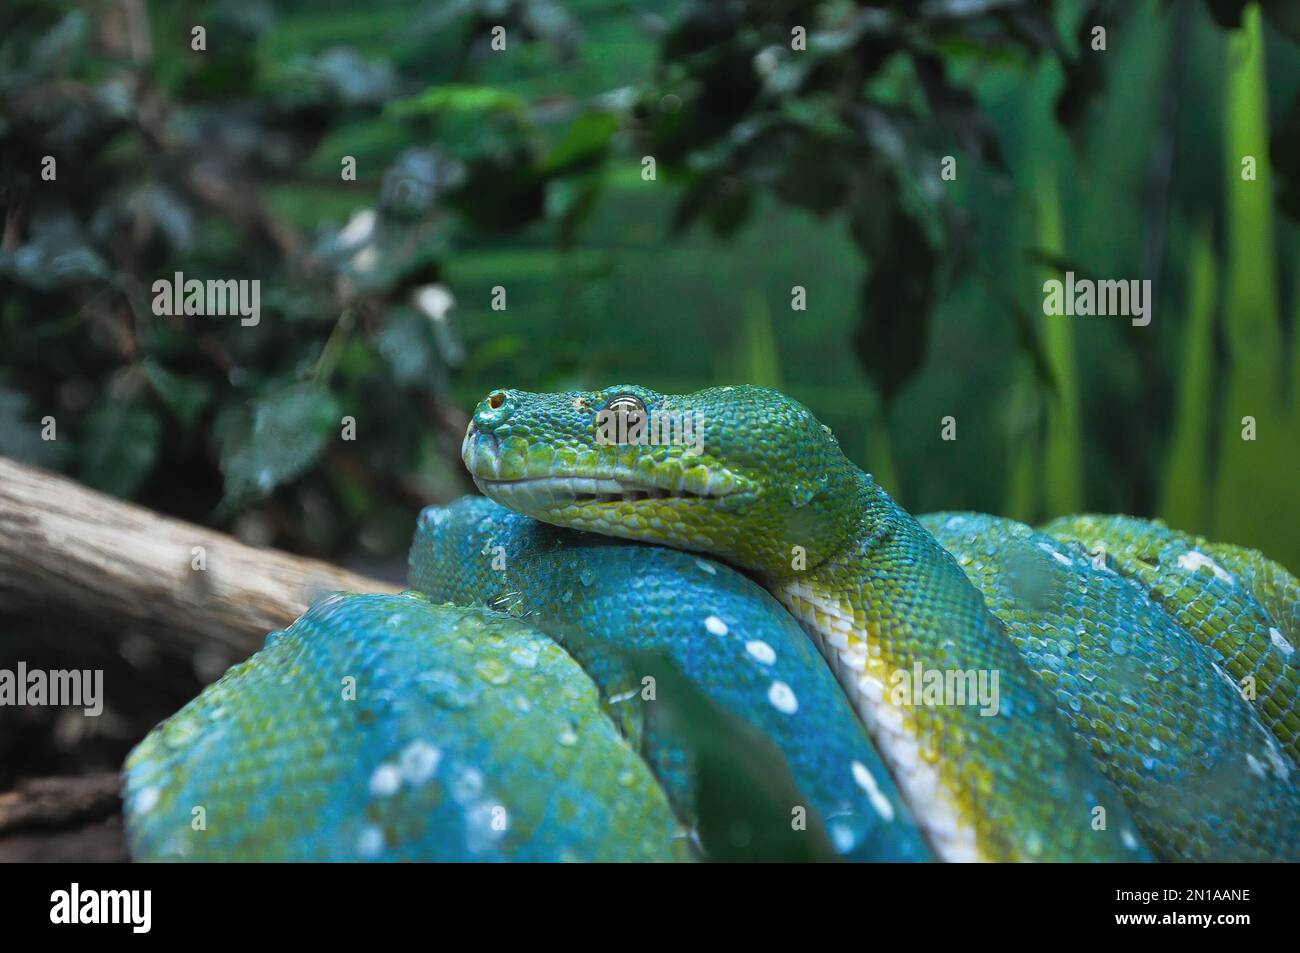 Here you can see this beatiful green phyton who are relaxing, snakes are fantastic creatures ad also terrifying with their bites. Stock Photo